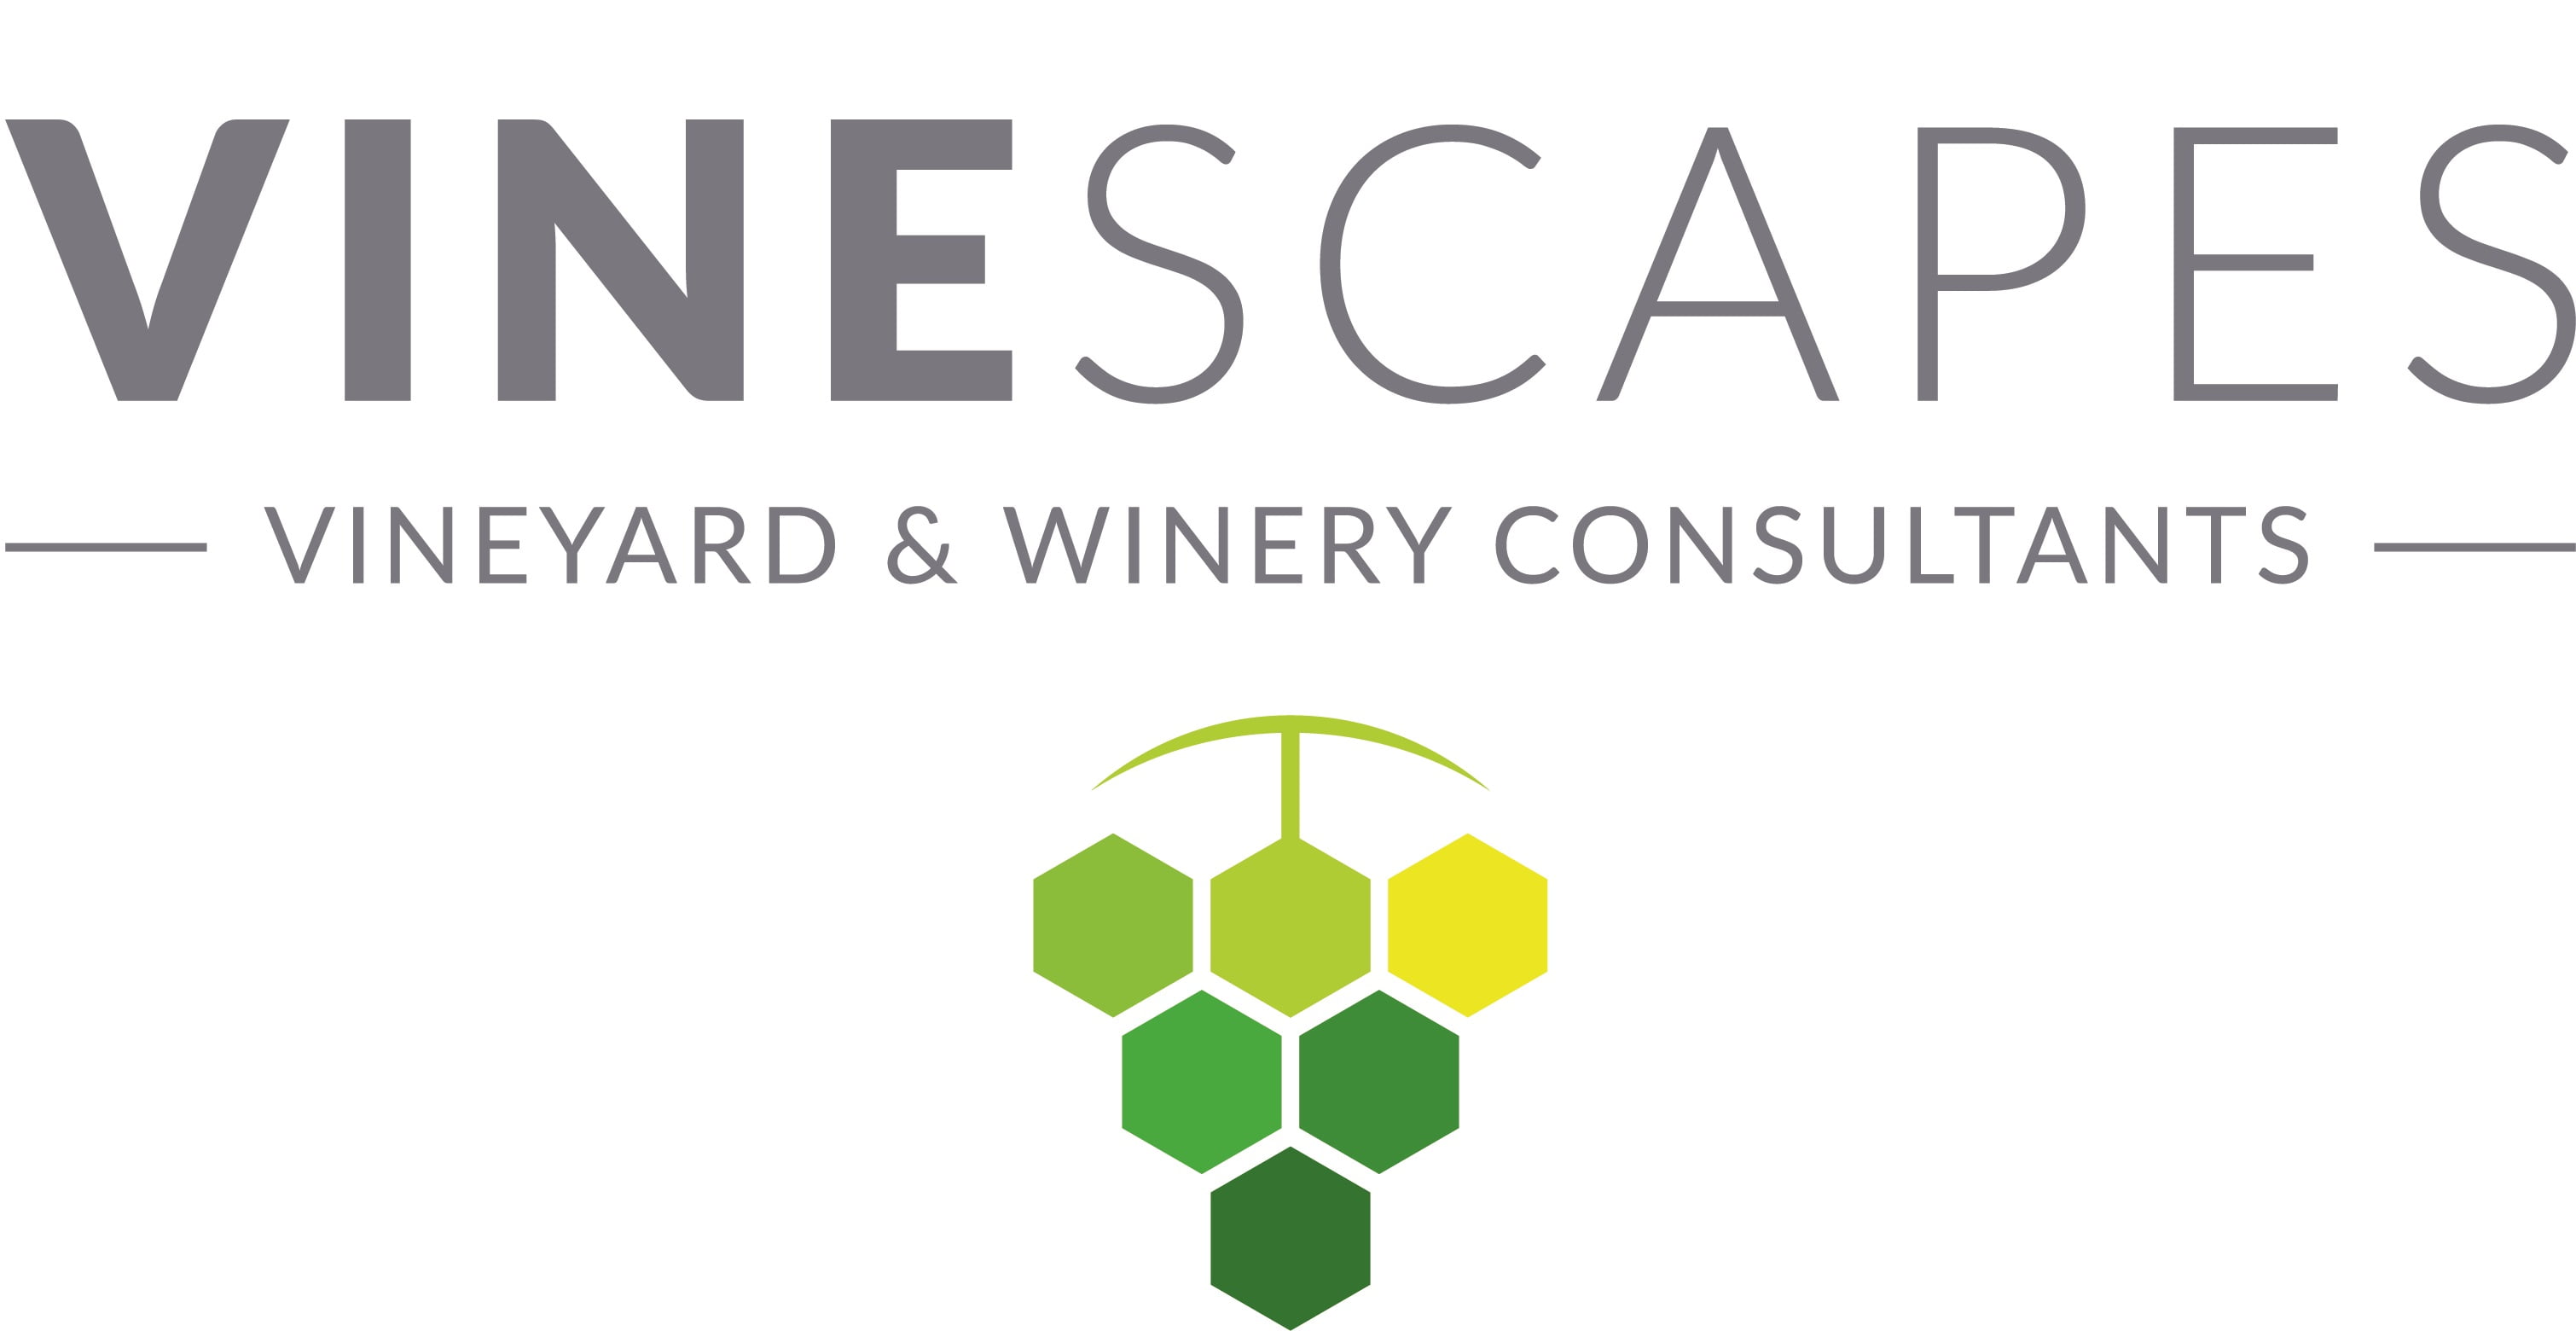 Vineyard and winery consultants